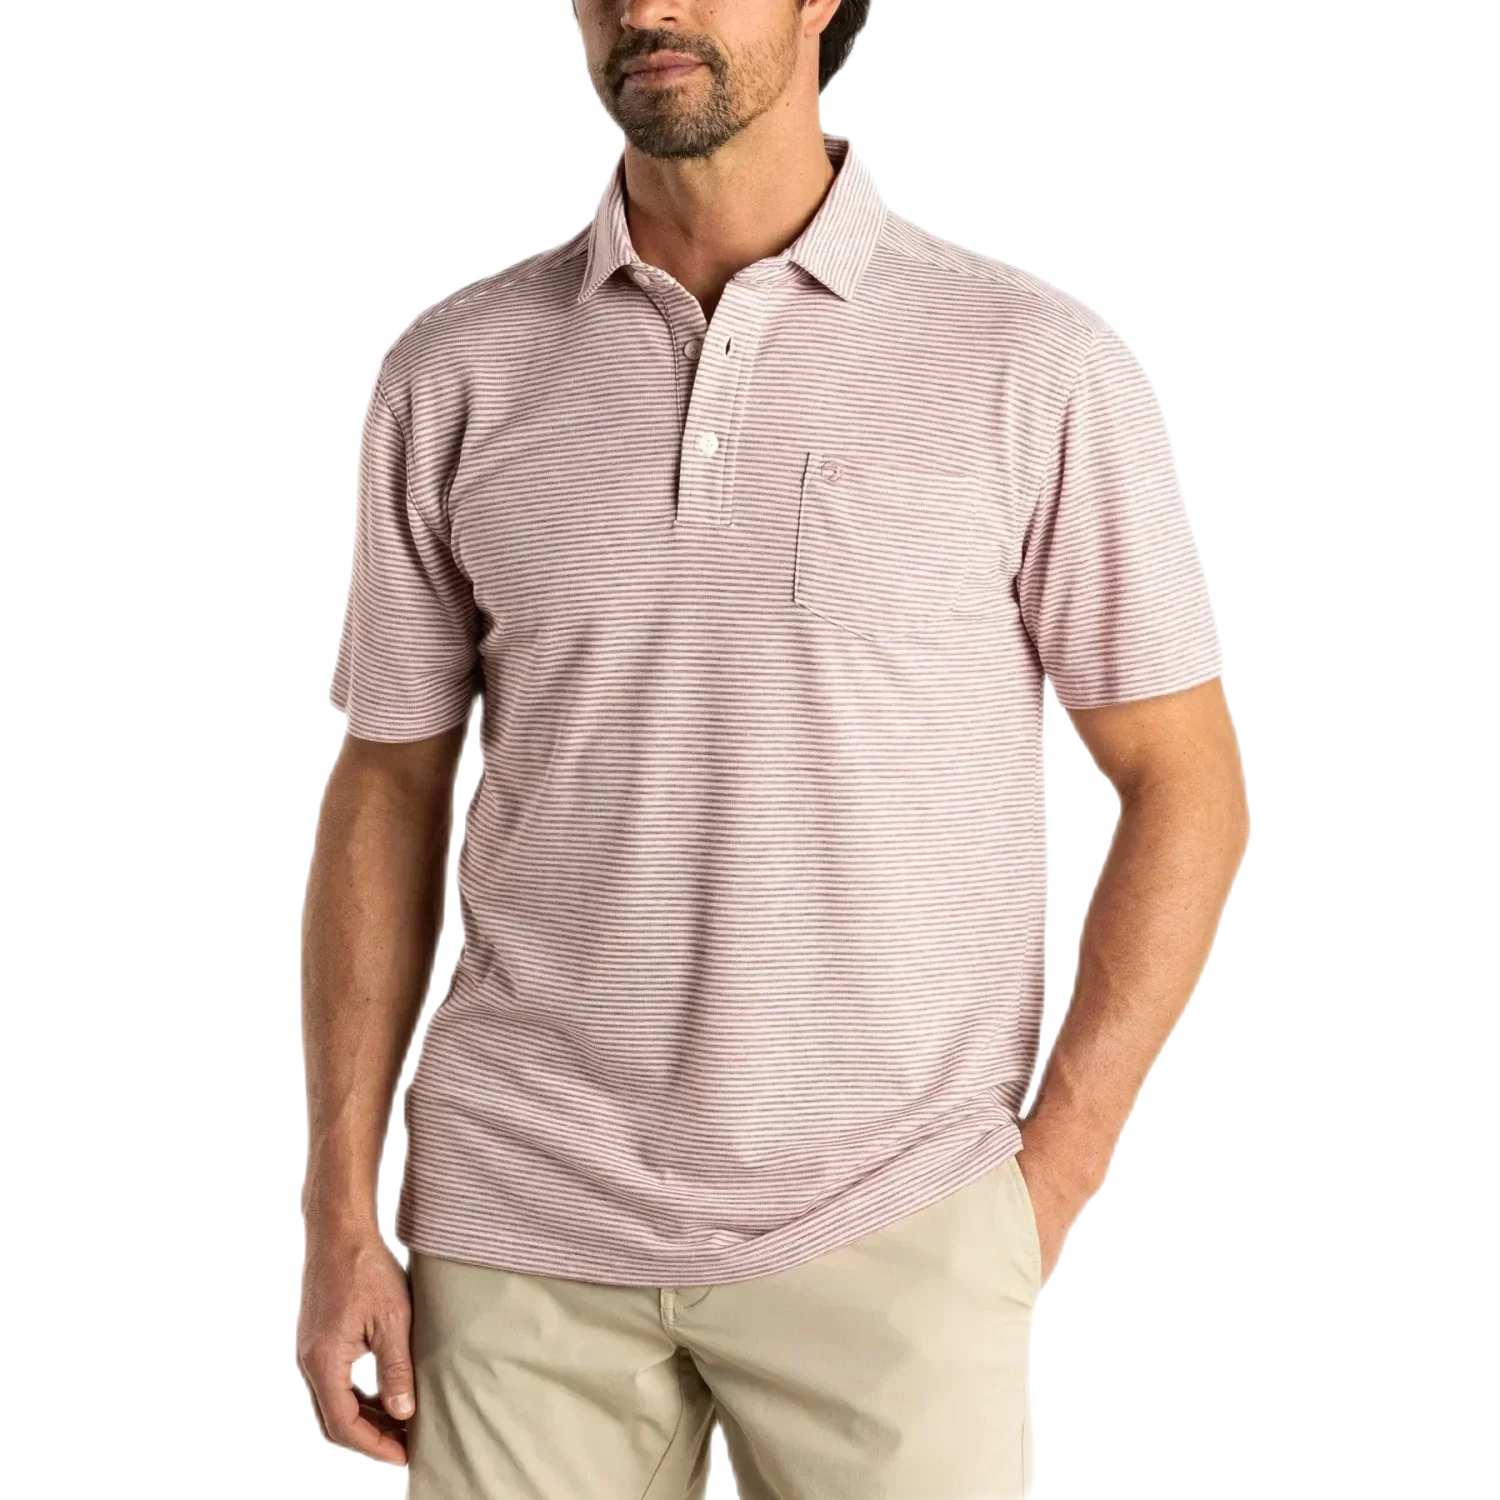 Duck Head 01. MENS APPAREL - MENS SS SHIRTS - MENS SS POLO Men's Summerford Stripe Performance Polo 686 BAKED RED HEATHER